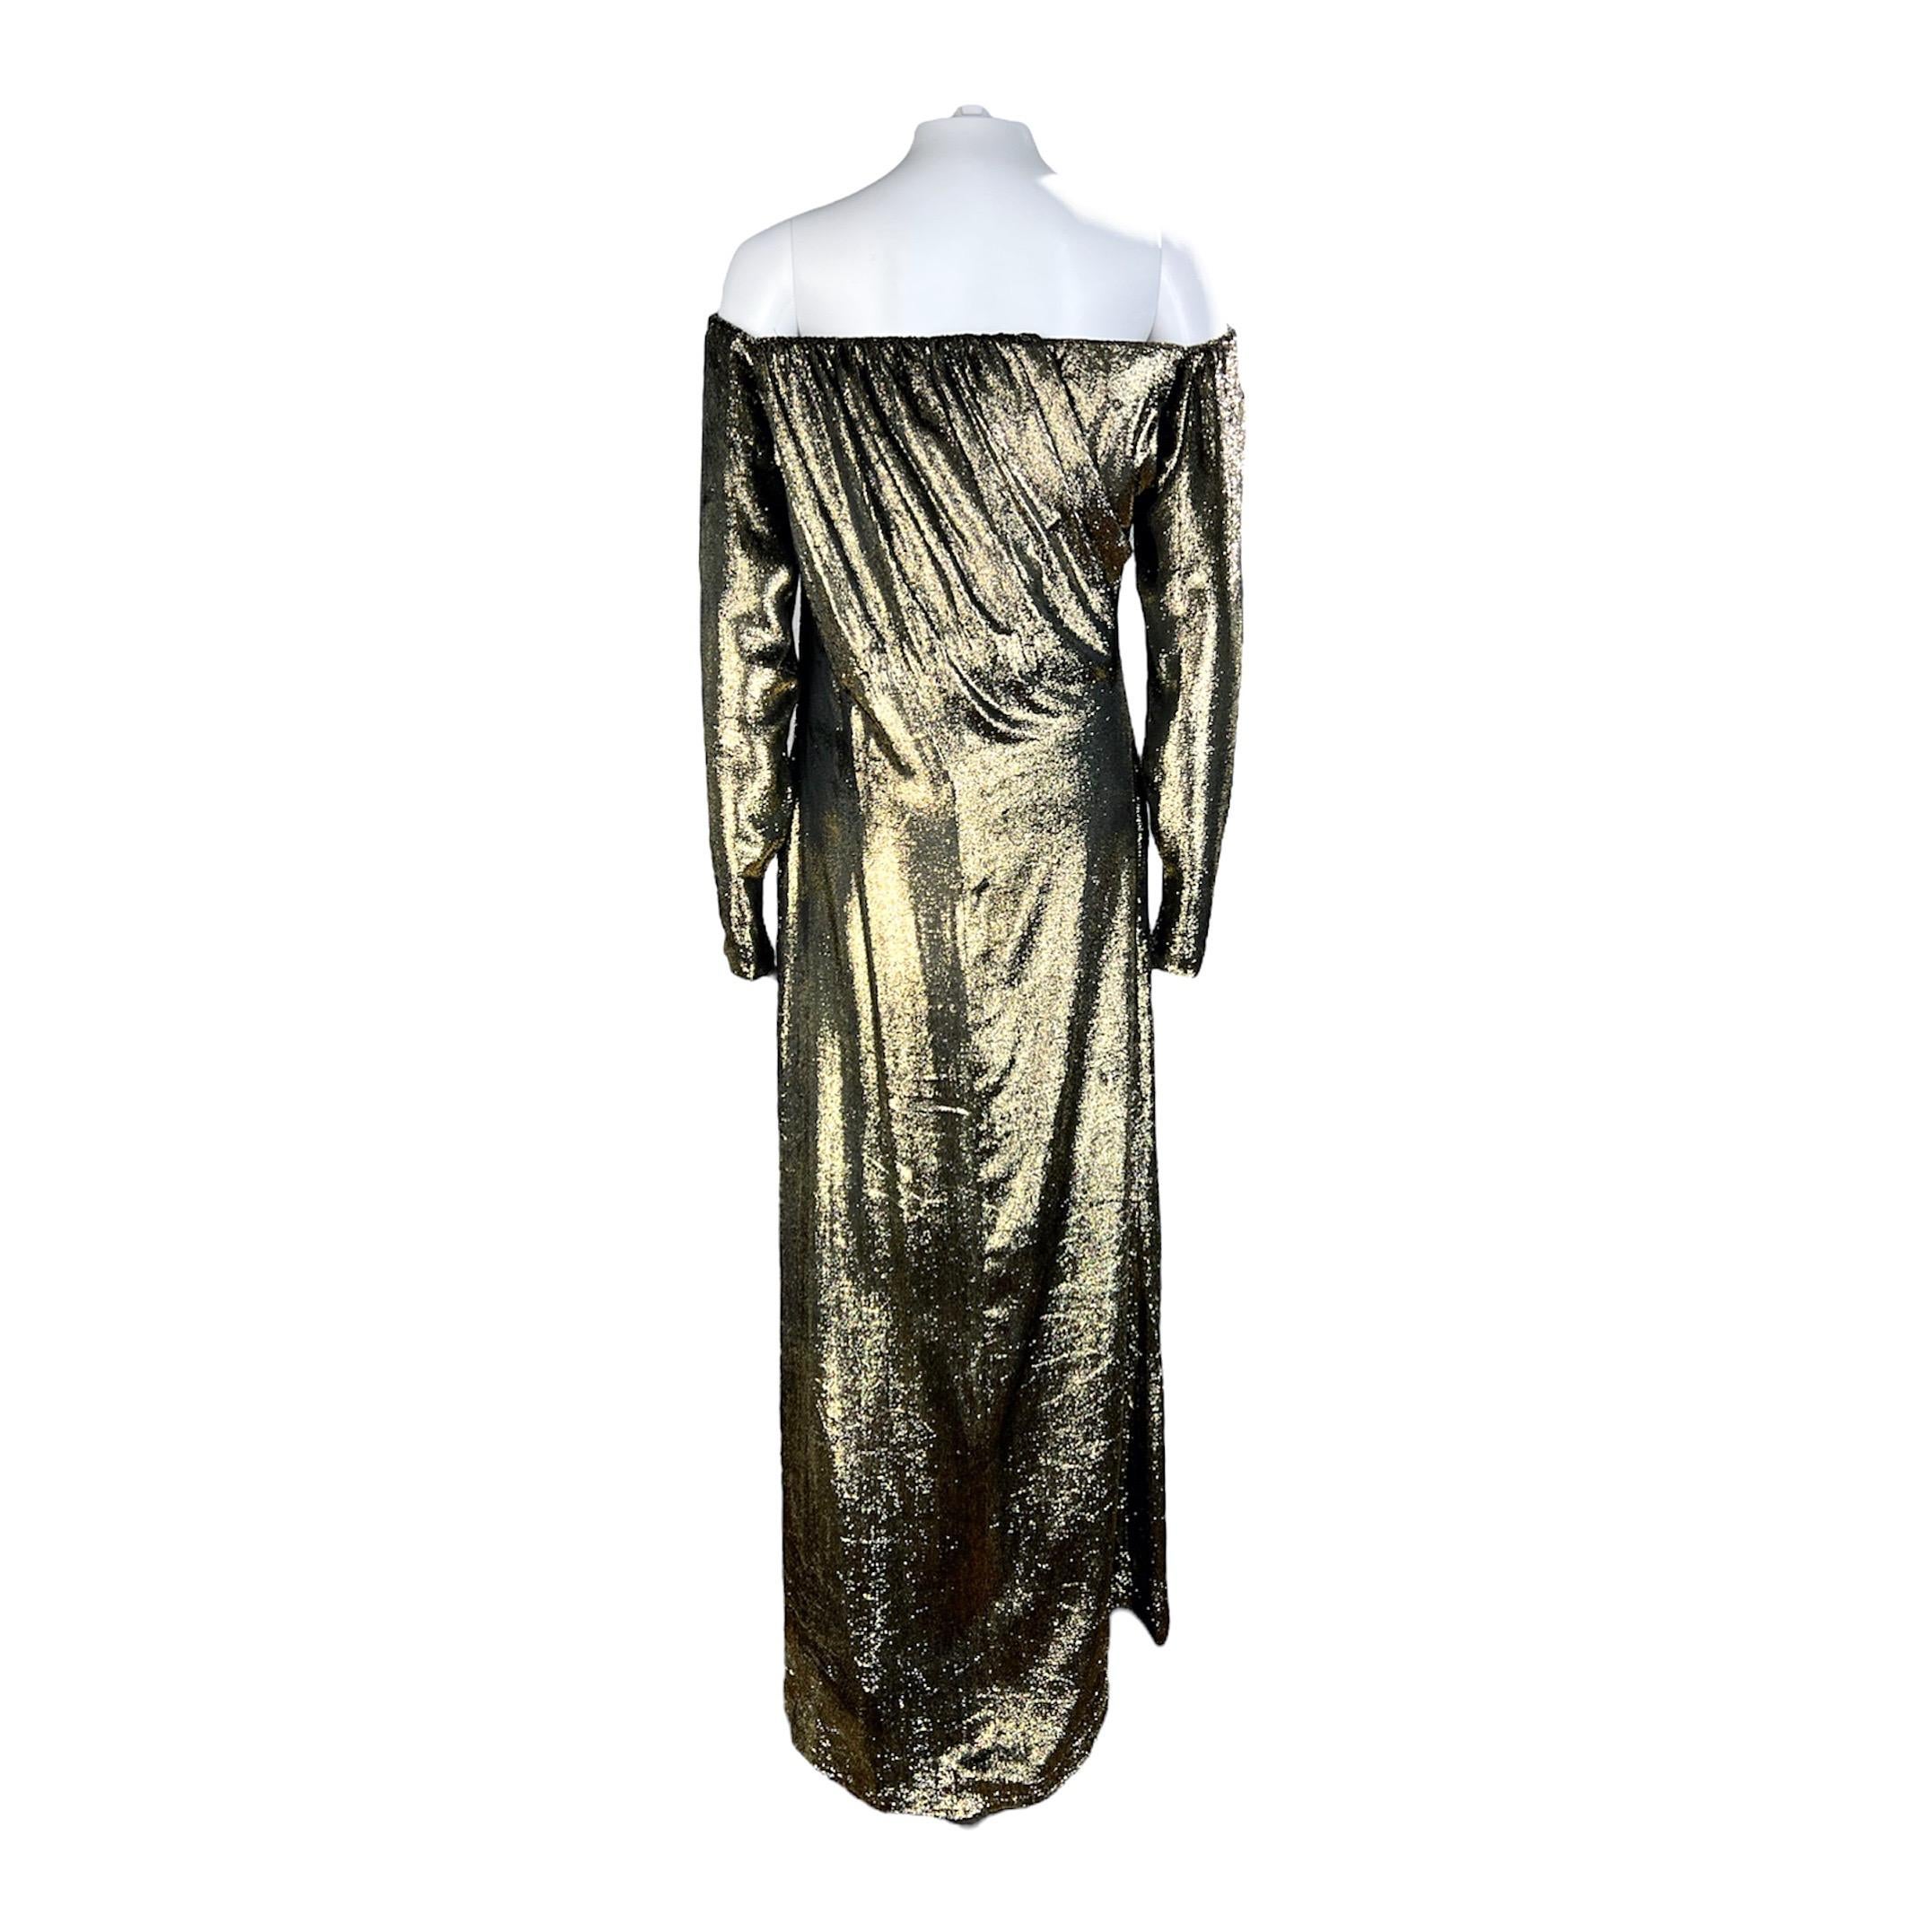 Yves Saint Laurent Spring 1989 Gown In Excellent Condition For Sale In Brooklyn, NY